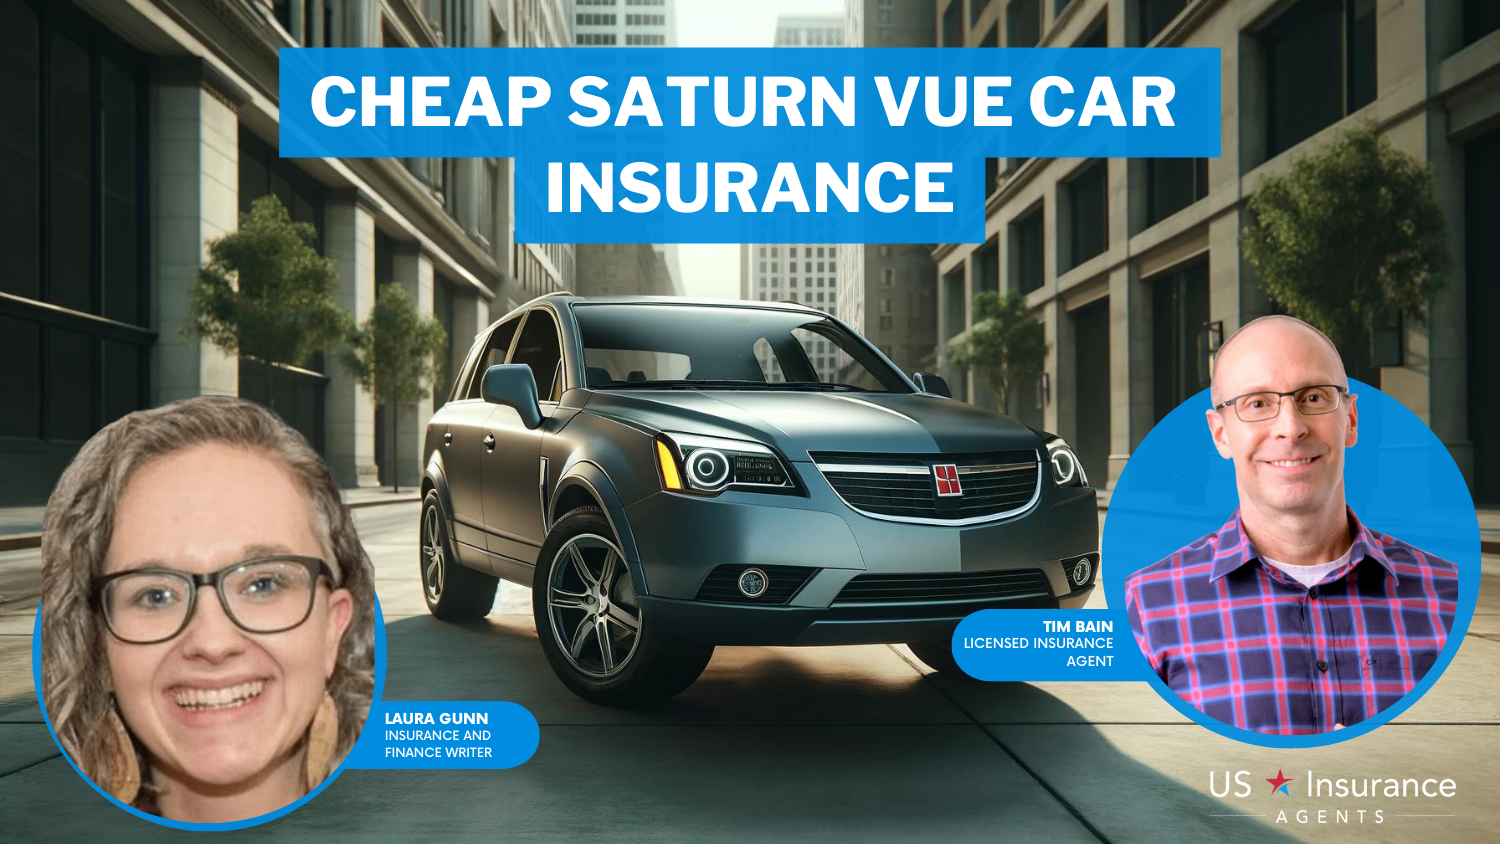 Cheap Saturn VUE Car Insurance:USAA, State Farm, and Auto-Owners